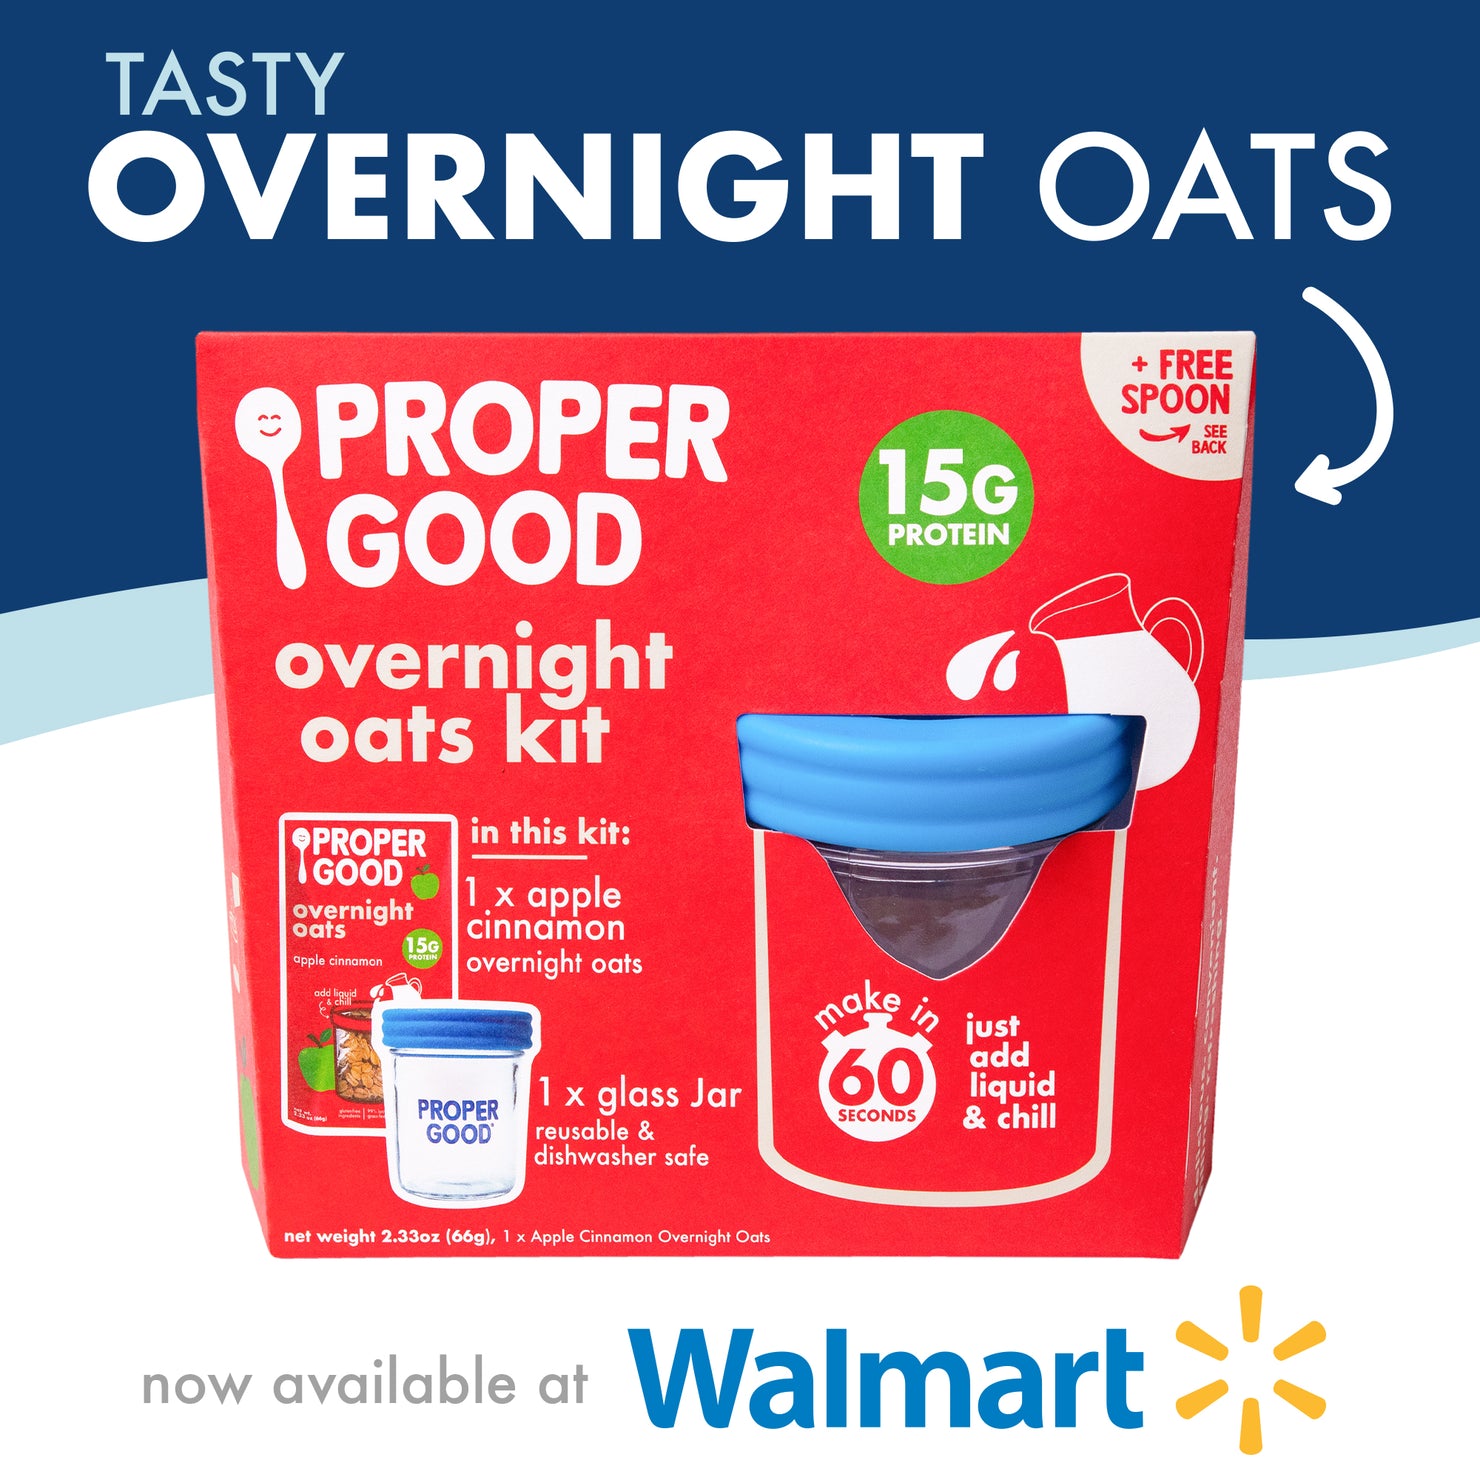 Overnight Oats Kit now available in Walmart - Eat Proper Good